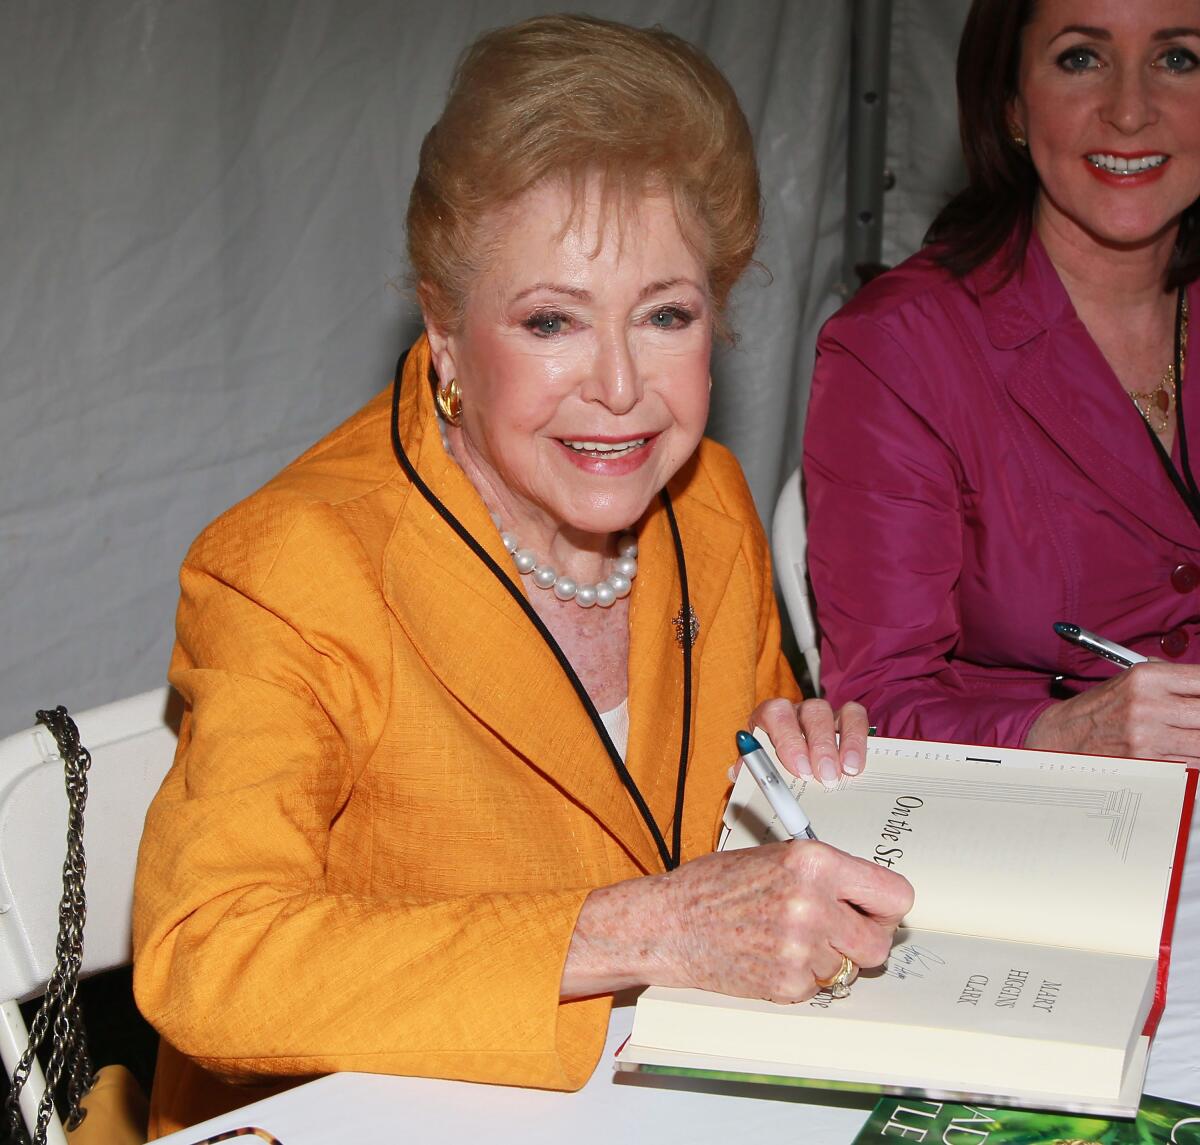 Mary Higgins Clark, signing one of her books, and daughter Carol Higgins Clark at the 2011 L.A. Times Festival of Books.